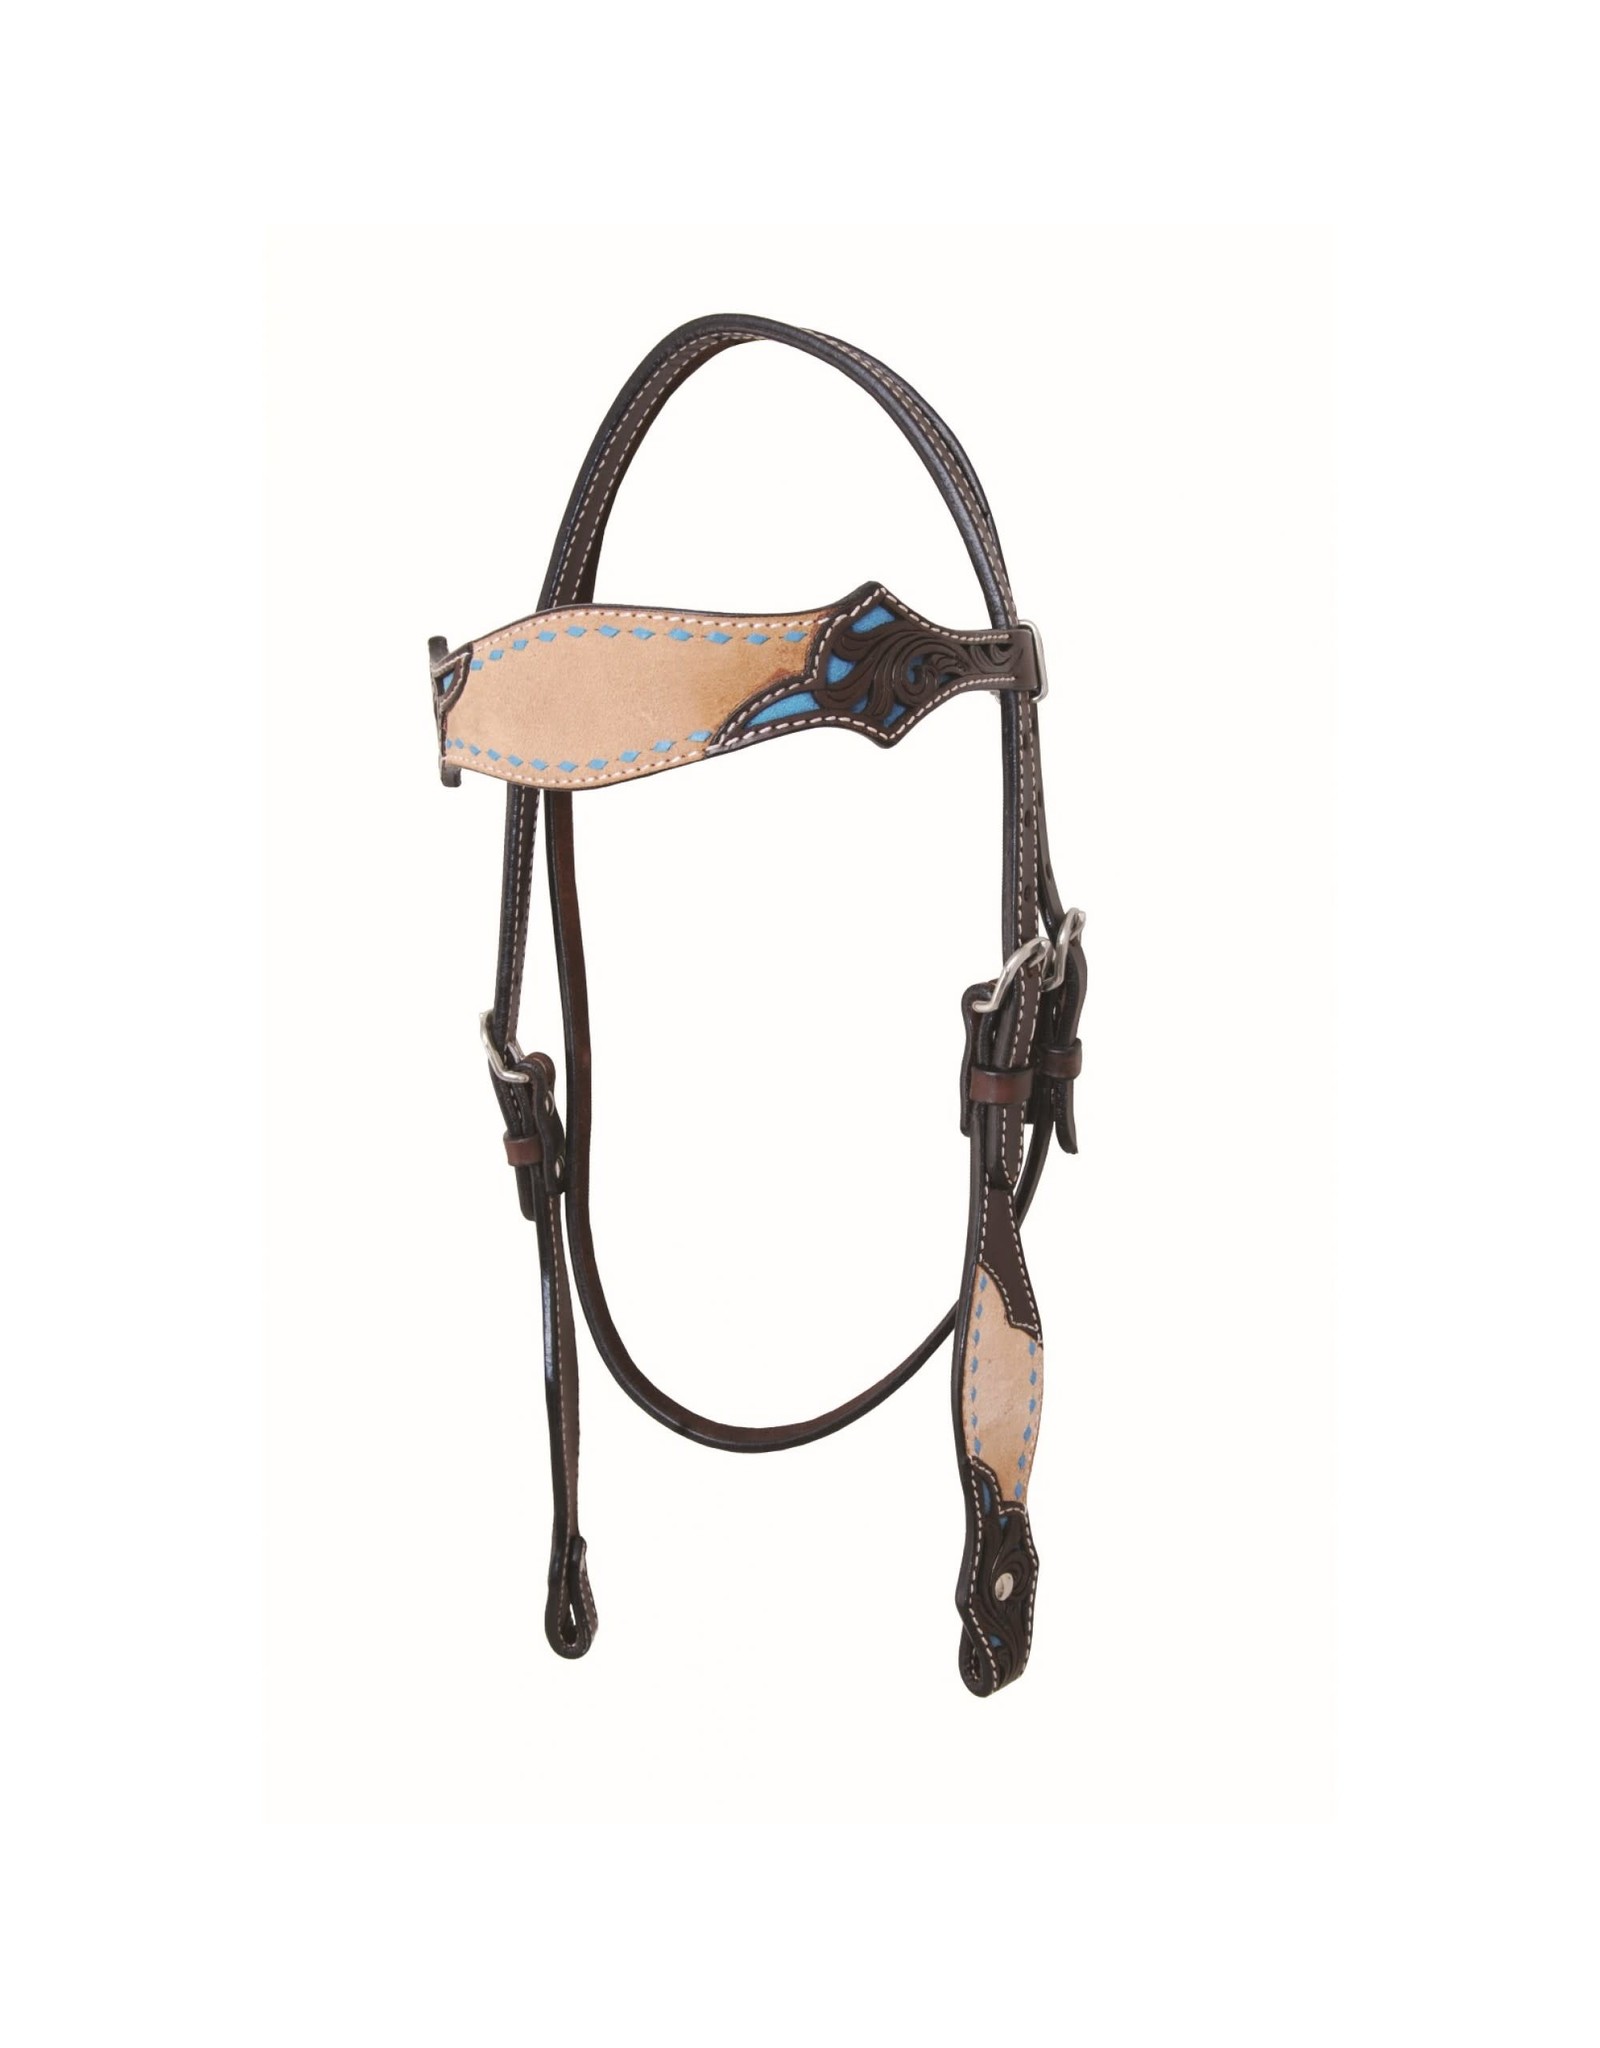 Country Legend Rough Out Browband Headstall, Turq, - 220032-19